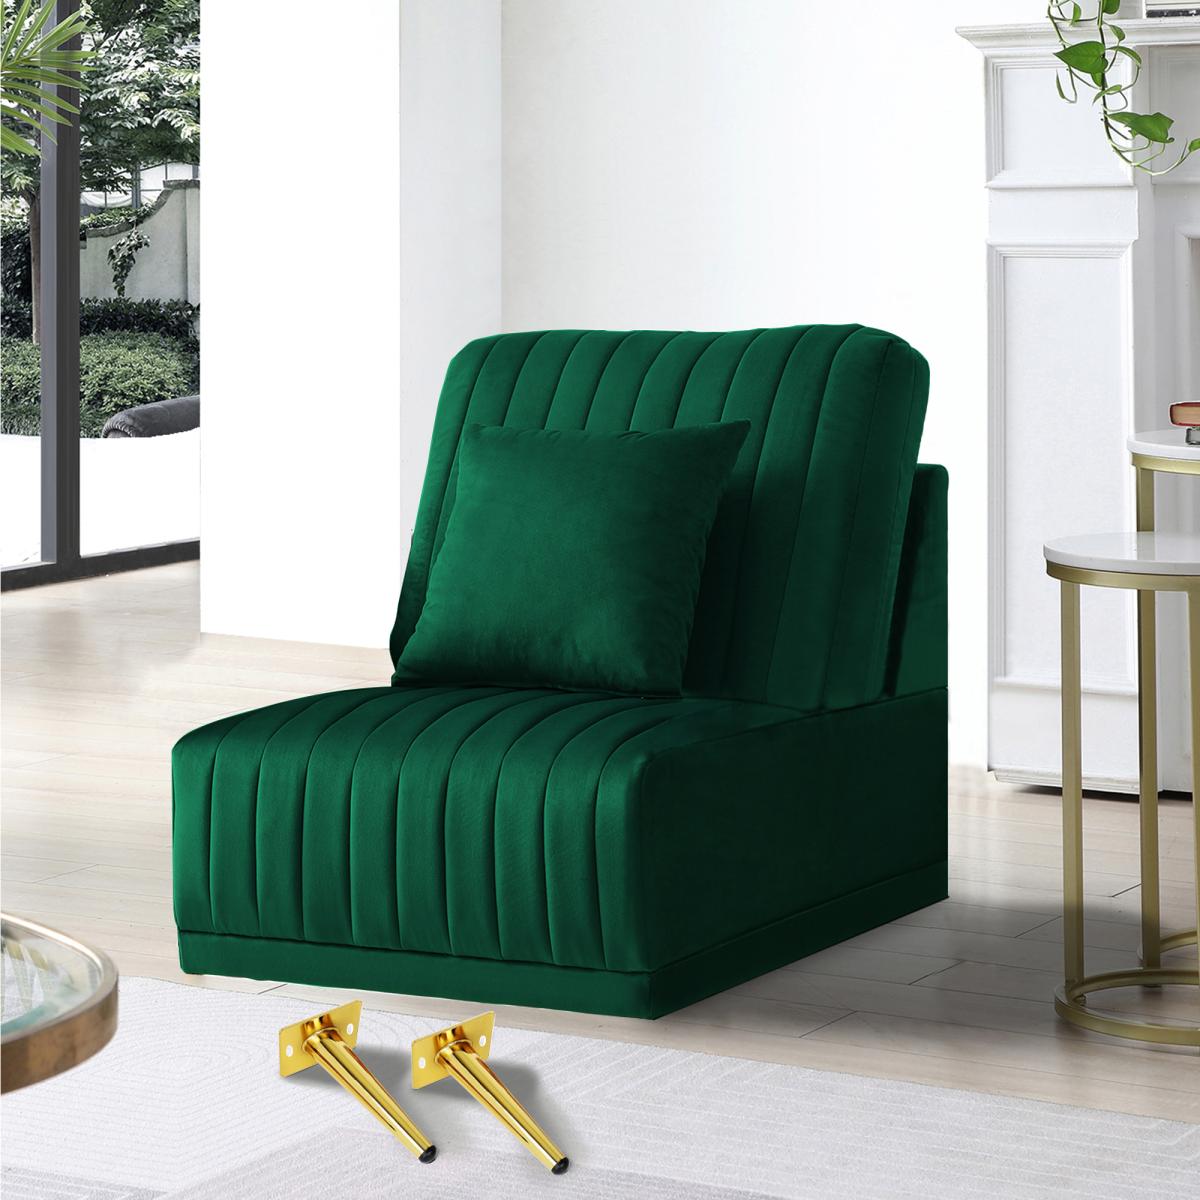 The green sofa without armrests is not sold separately and needs to be combined with other parts or multiple seats.